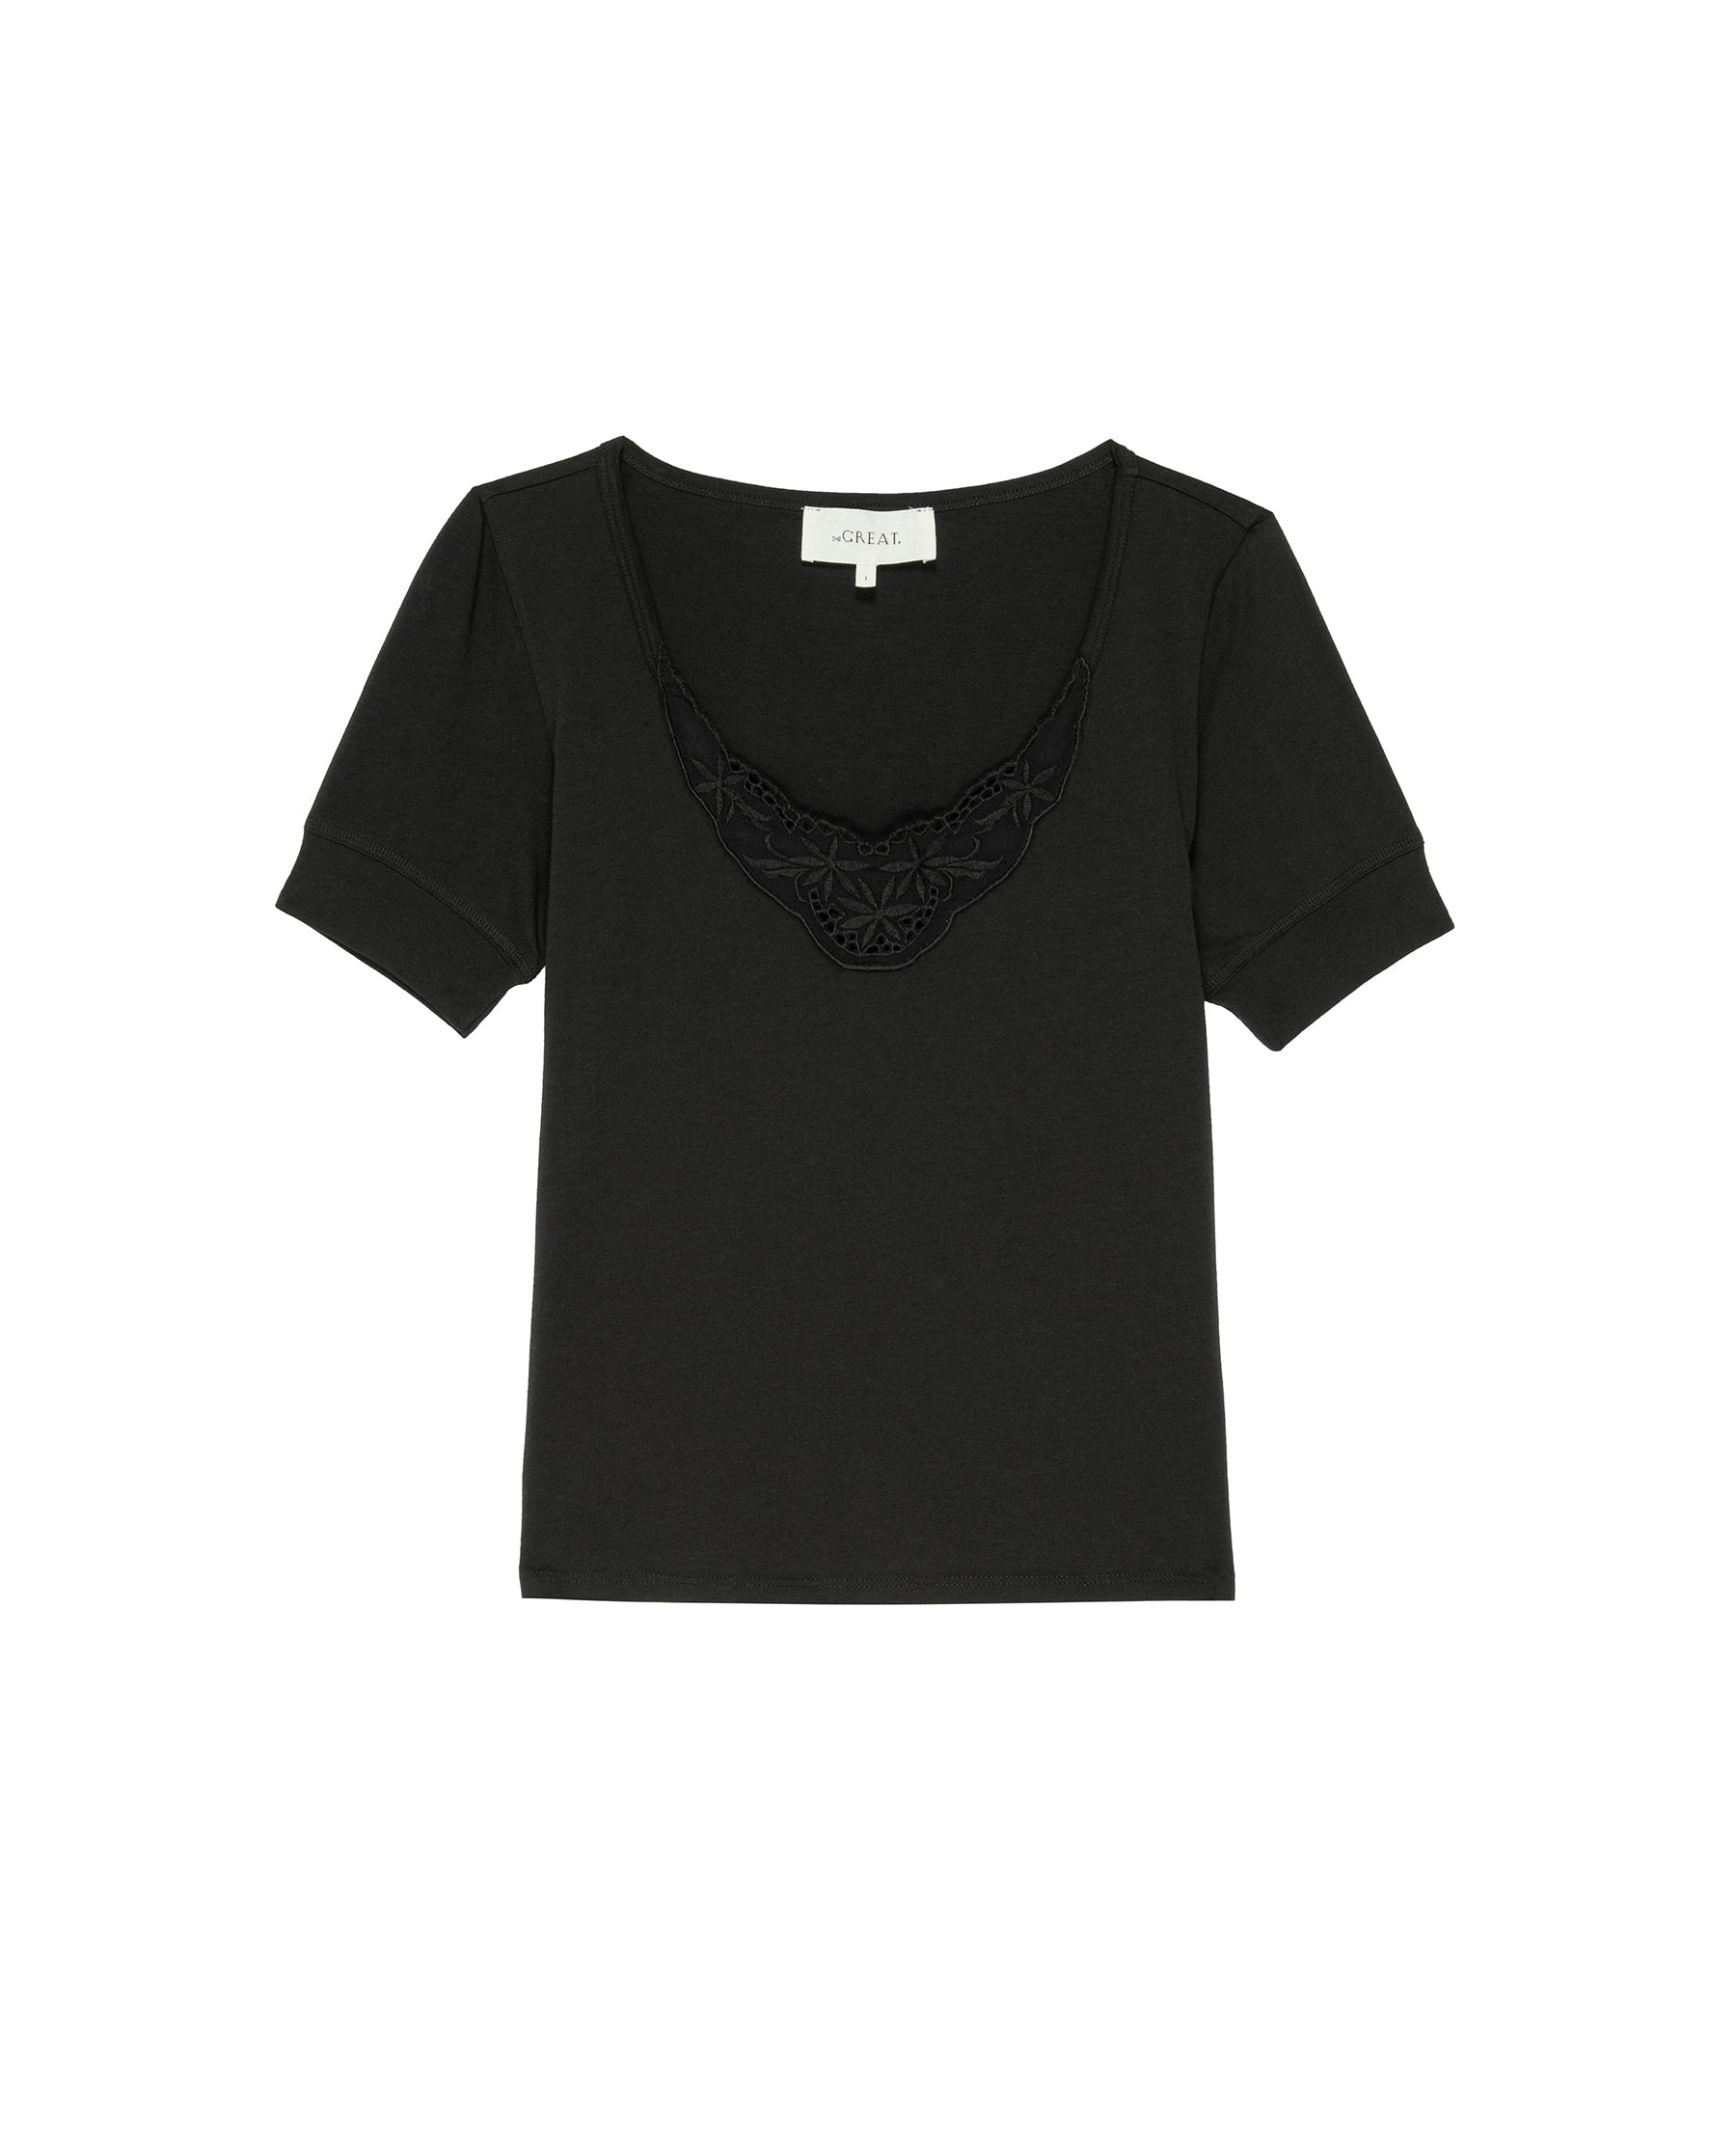 The Victorian Lace Tee. -- Almost Black